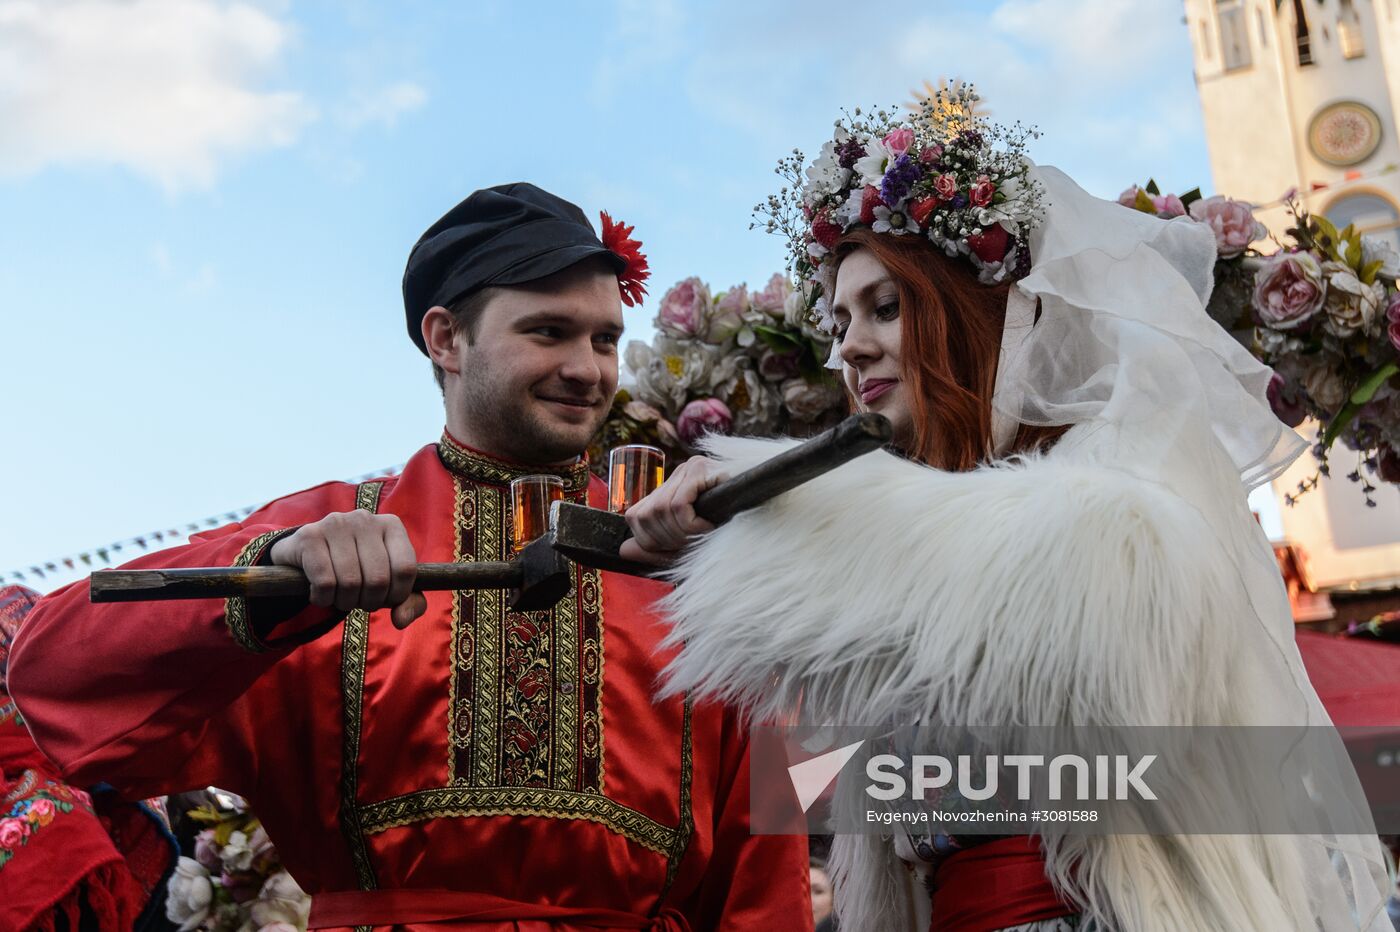 1st Lovers Festival in Moscow